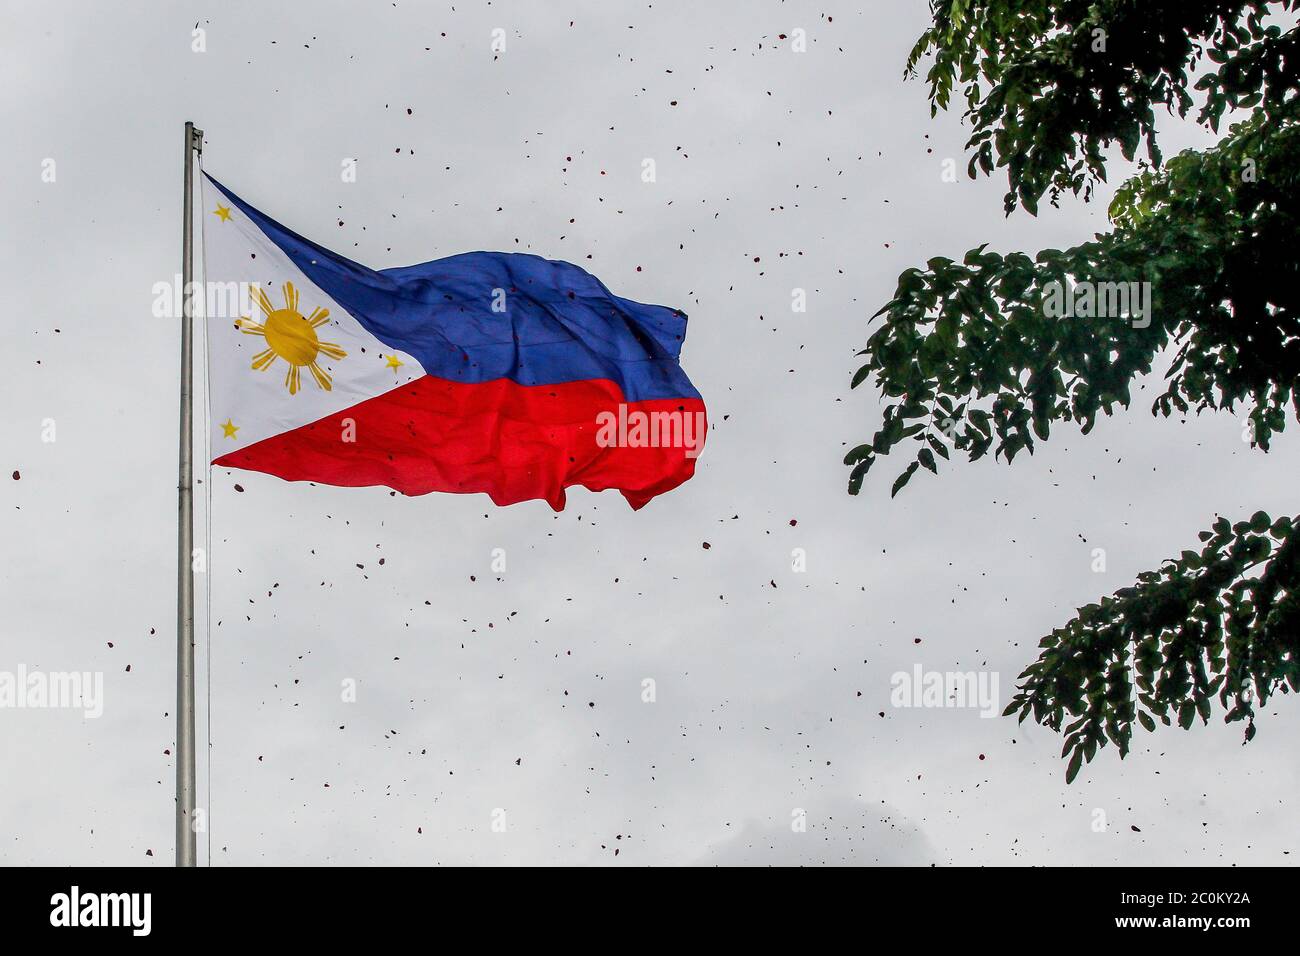 Manila 12th June Rose Petals And Confetti Rain Down On The Philippine National Flag During The Celebration Of The 122nd Philippine Independence Day In Manila The Philippines On June 12